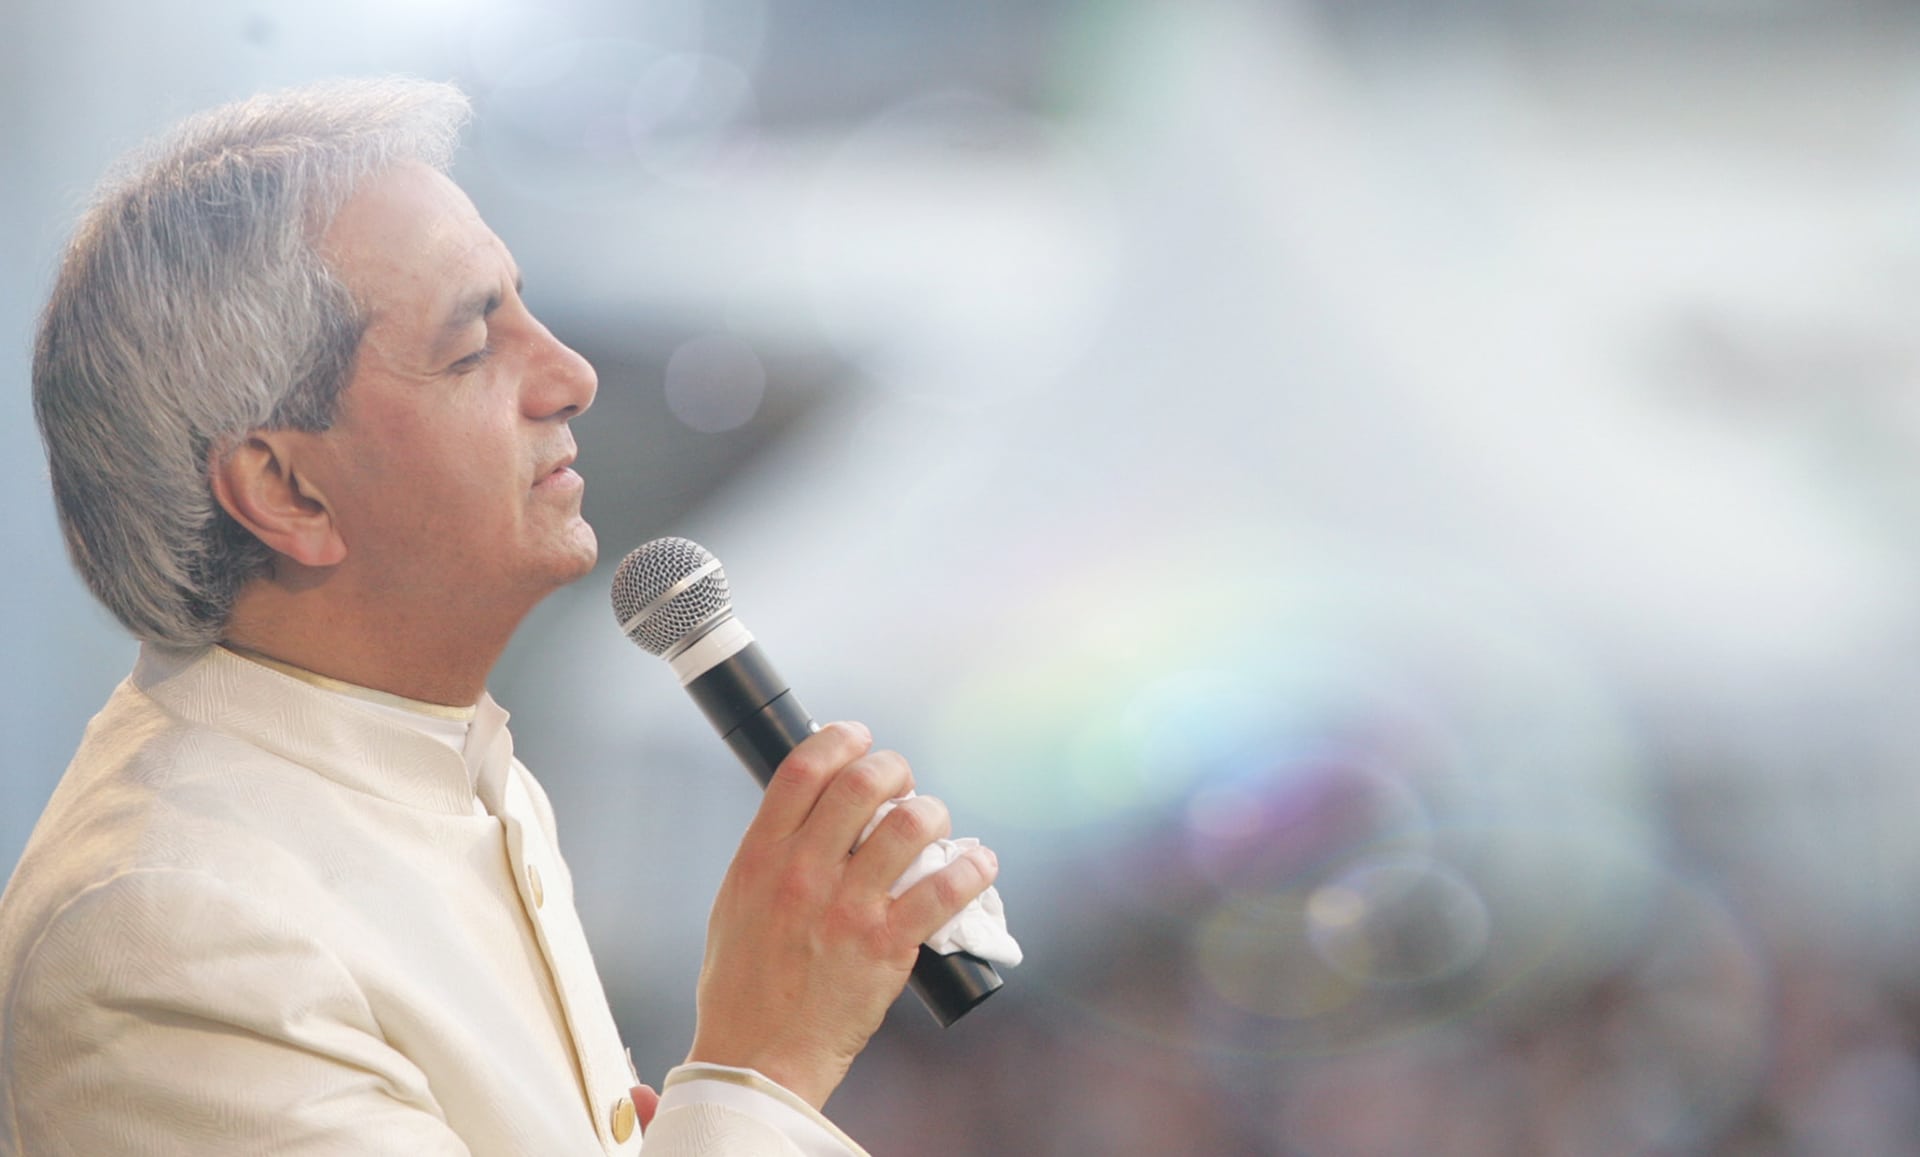 Photos and Information for Media Use - Benny Hinn Ministries